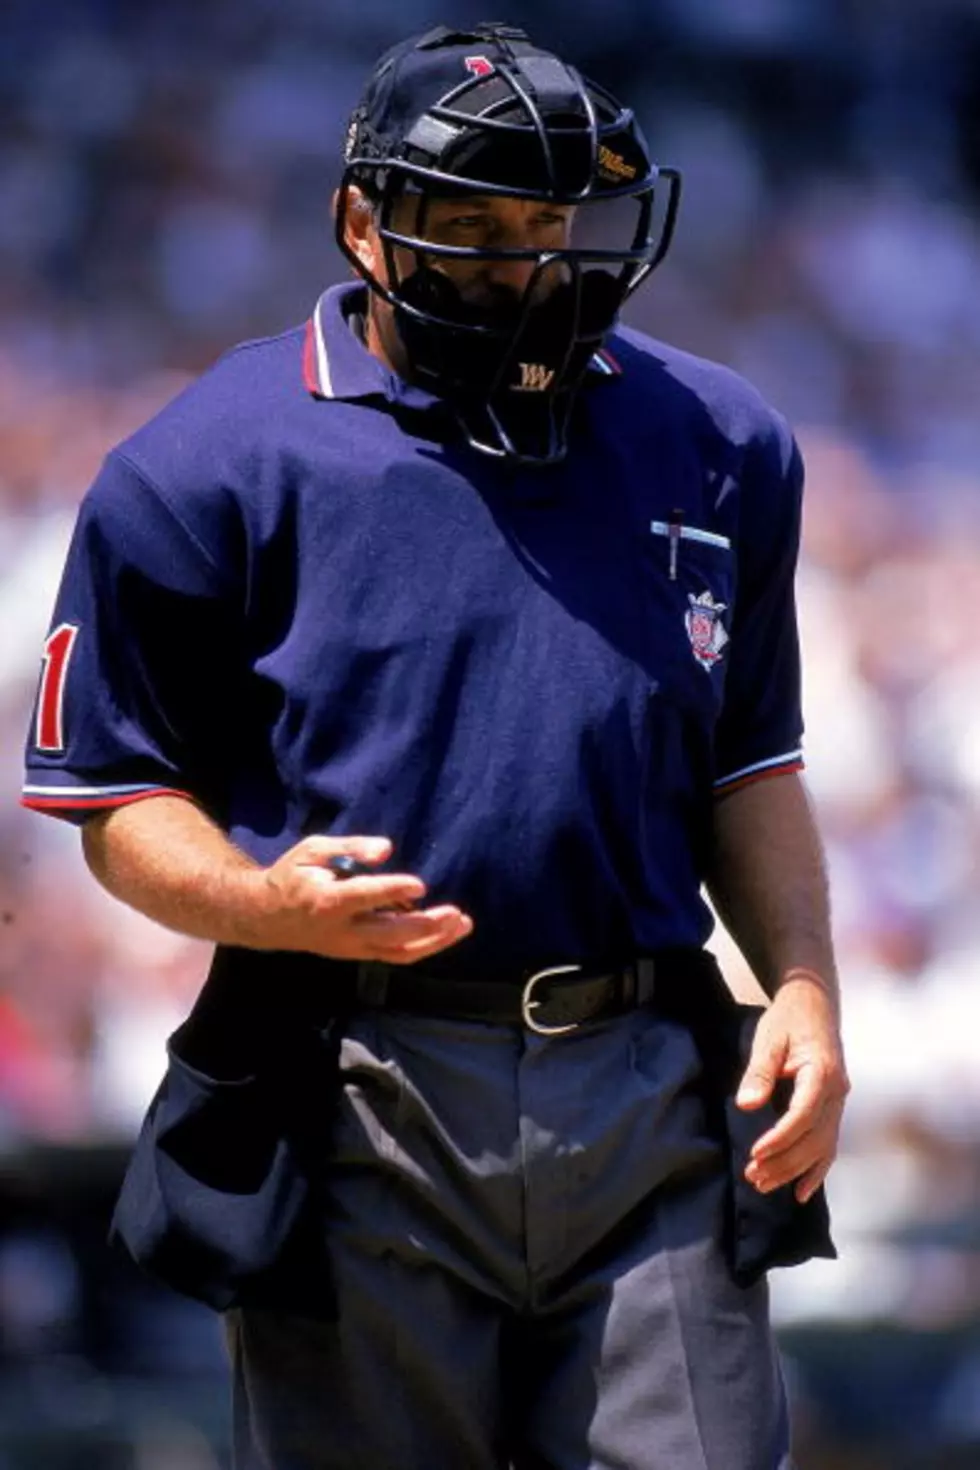 Most Outrageous Umpire Strike Three Call of All-time [VIDEO]